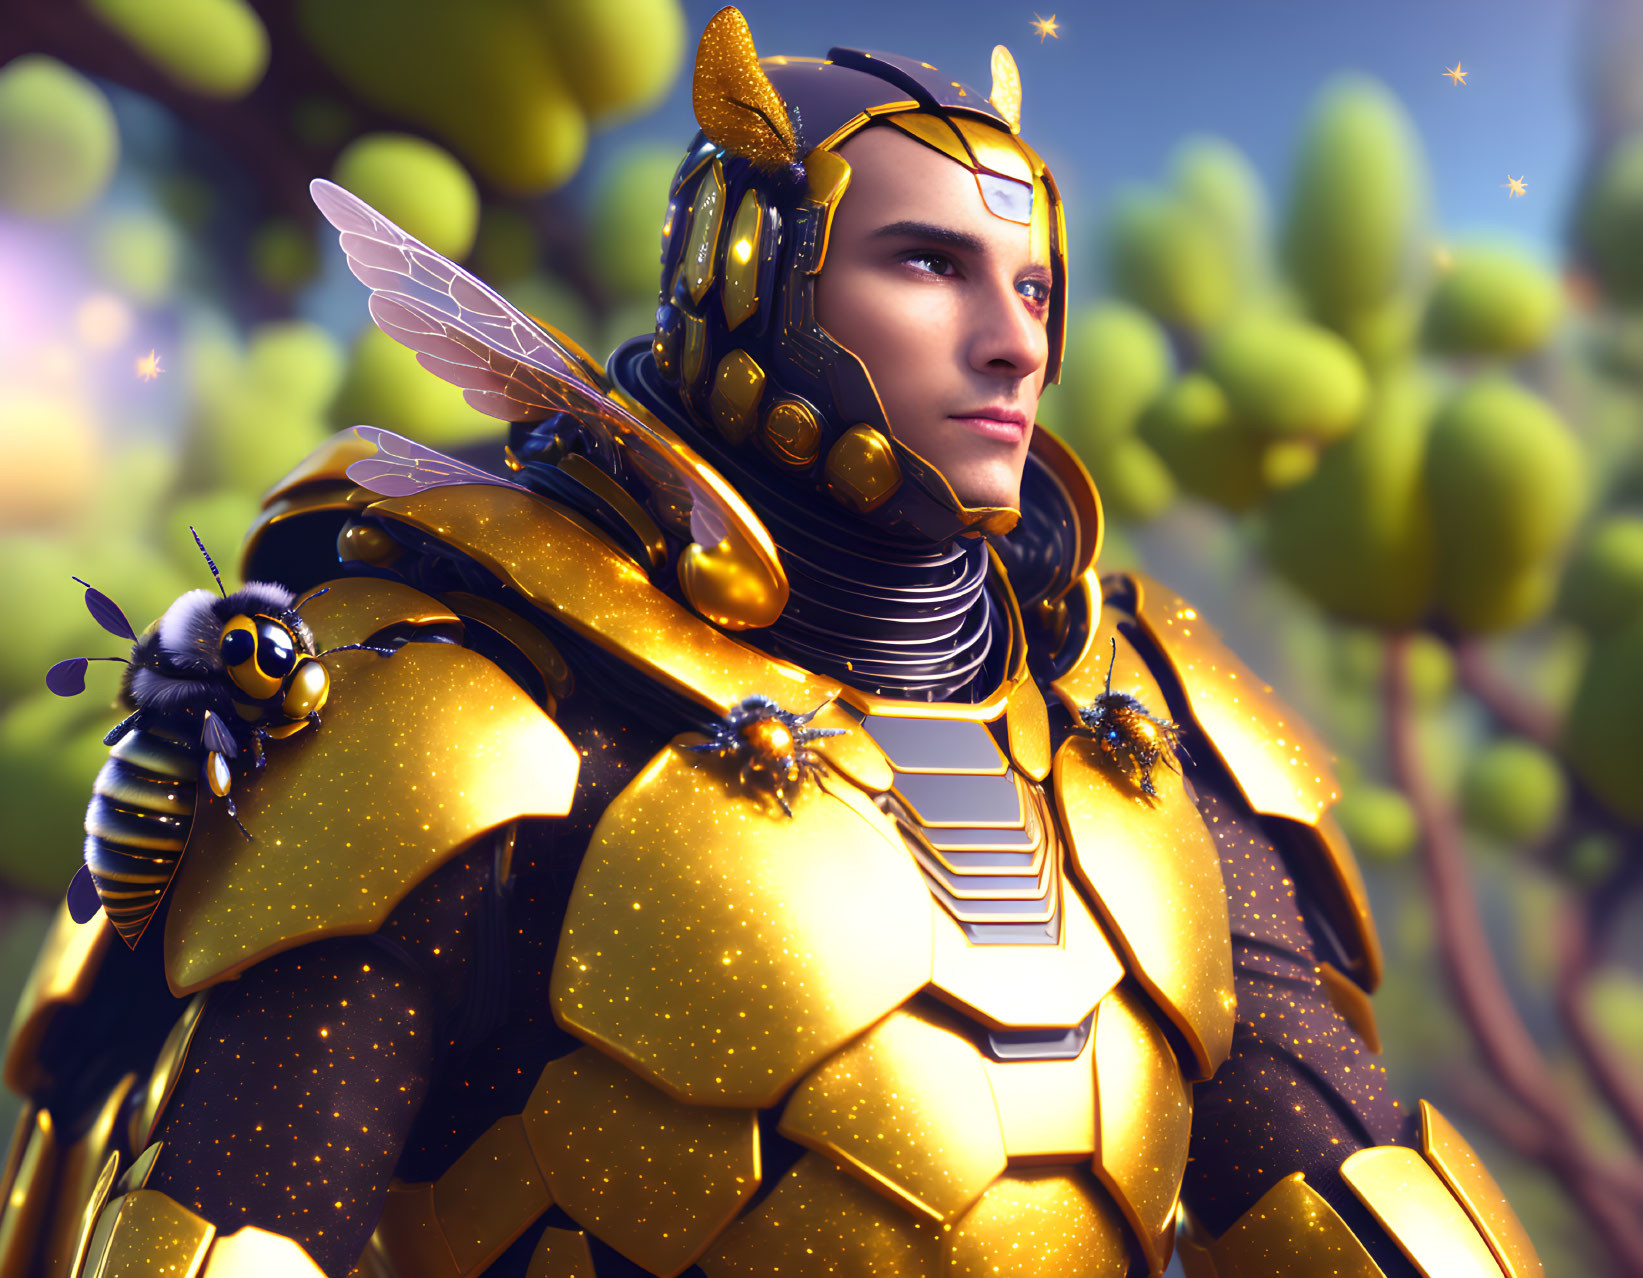 Futuristic bee-themed armor with wings and companion bee in vibrant flora